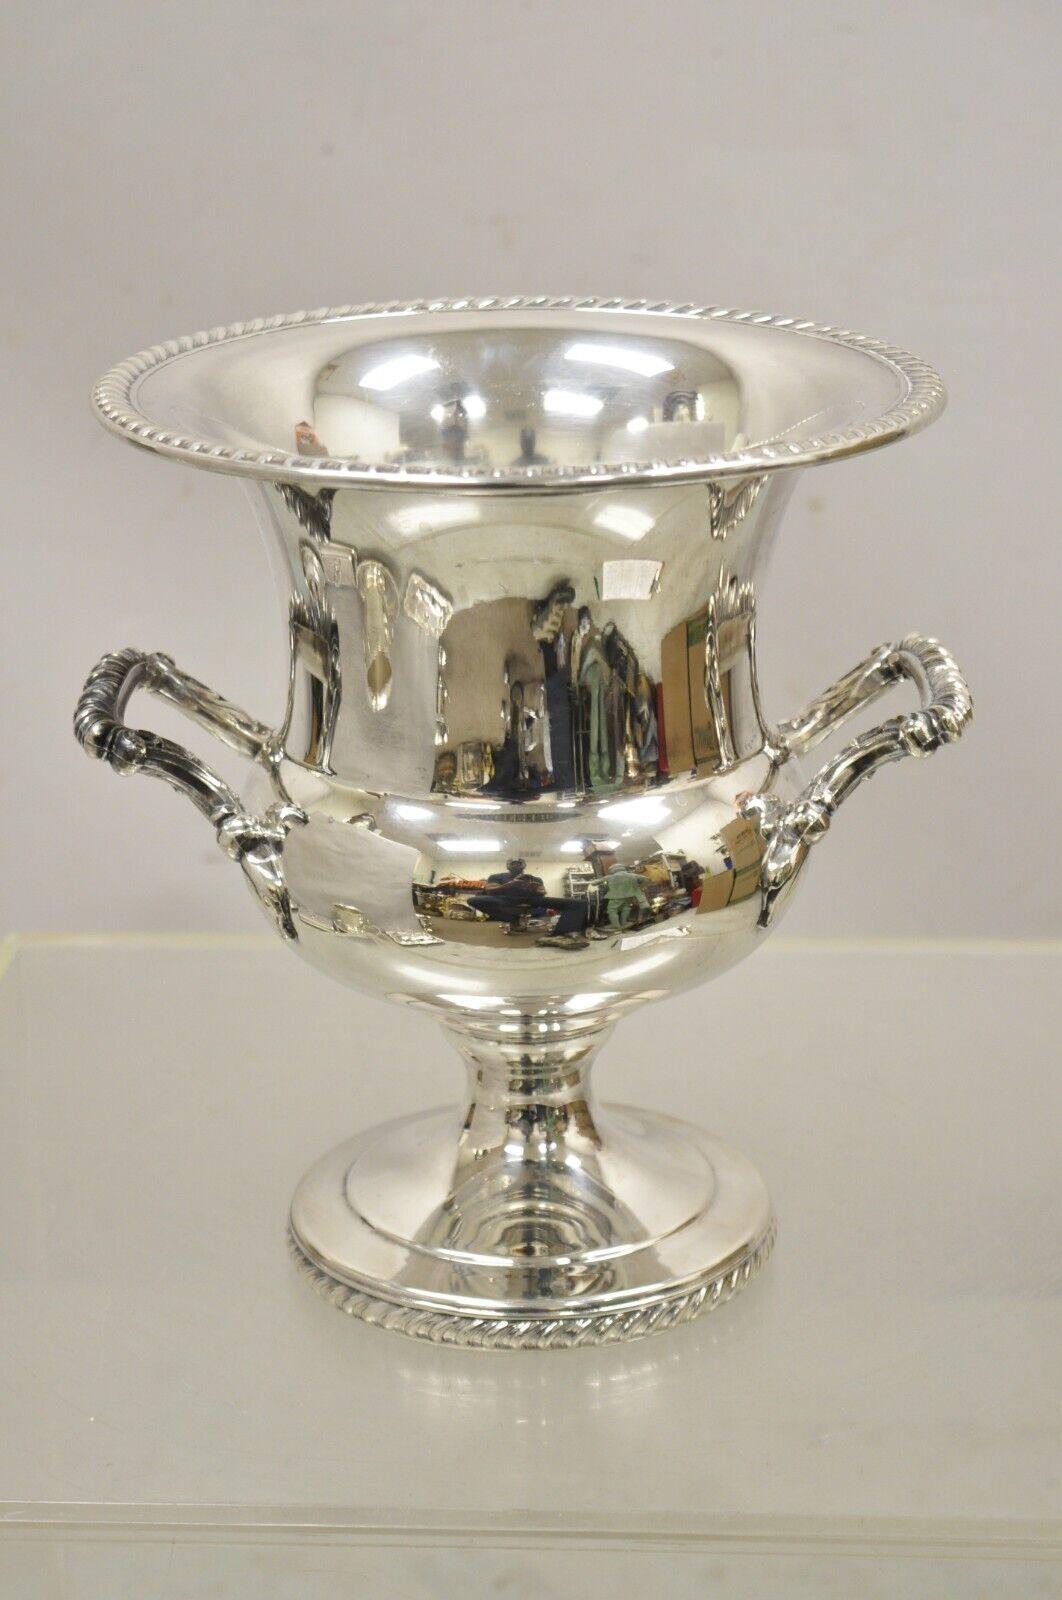 Vintage WM Rogers Regency Style Silver Plated Champagne Chiller Wince Ice Bucket. Item features raised pedestal base, ornate twin handles, original label, very nice vintage item,  great style and form. Circa Mid to Late 20th Century. Measurements: